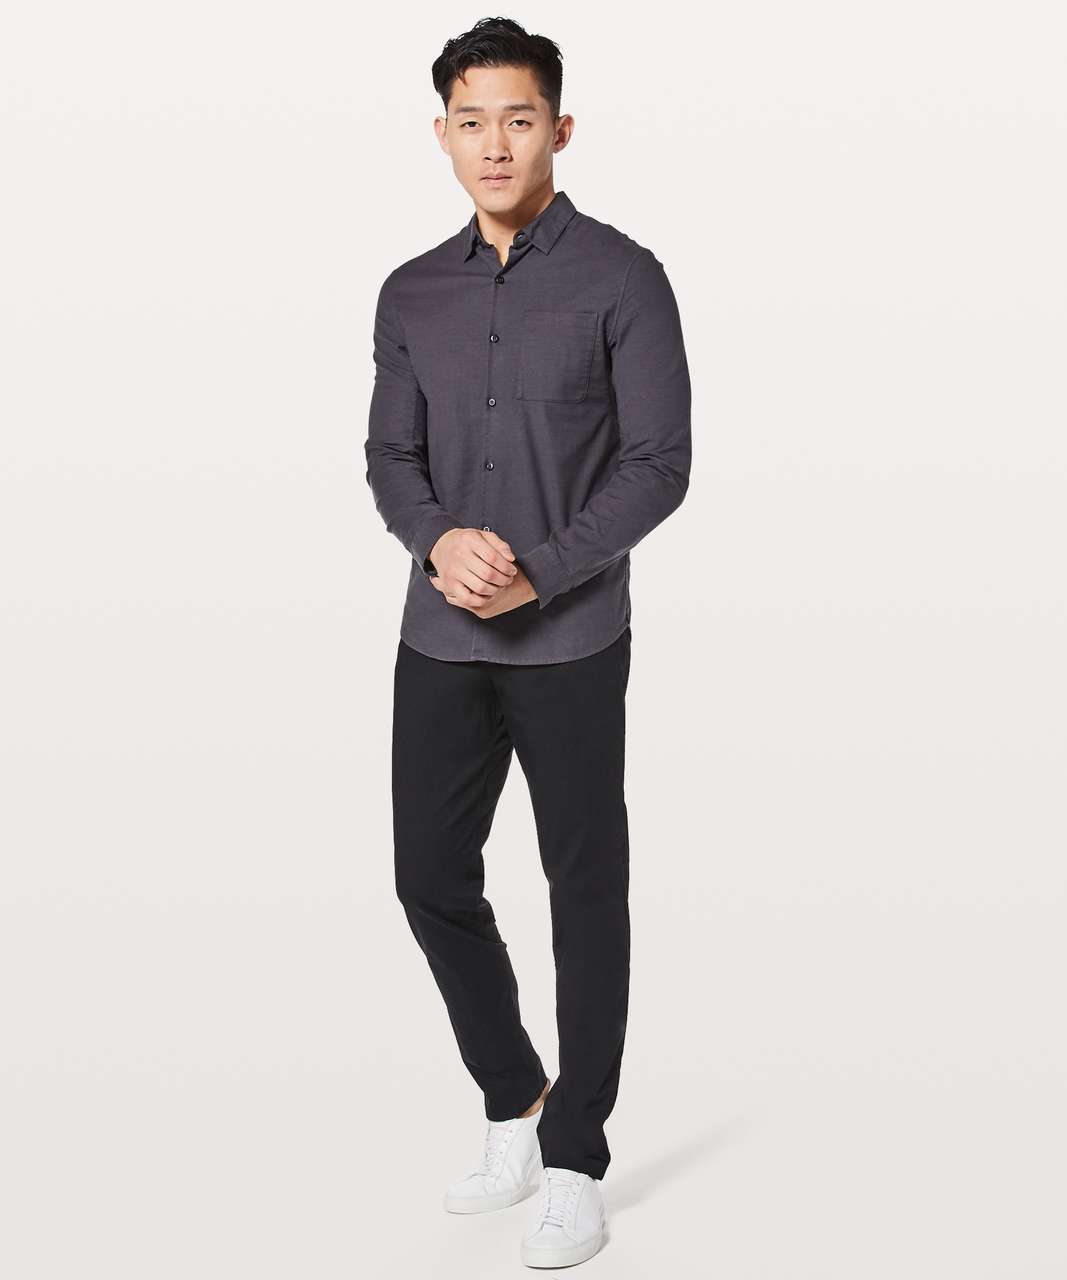 NEW Lululemon Black ABC Trousers Slim Fit / Commission Pant, Men's Fashion,  Bottoms, Trousers on Carousell